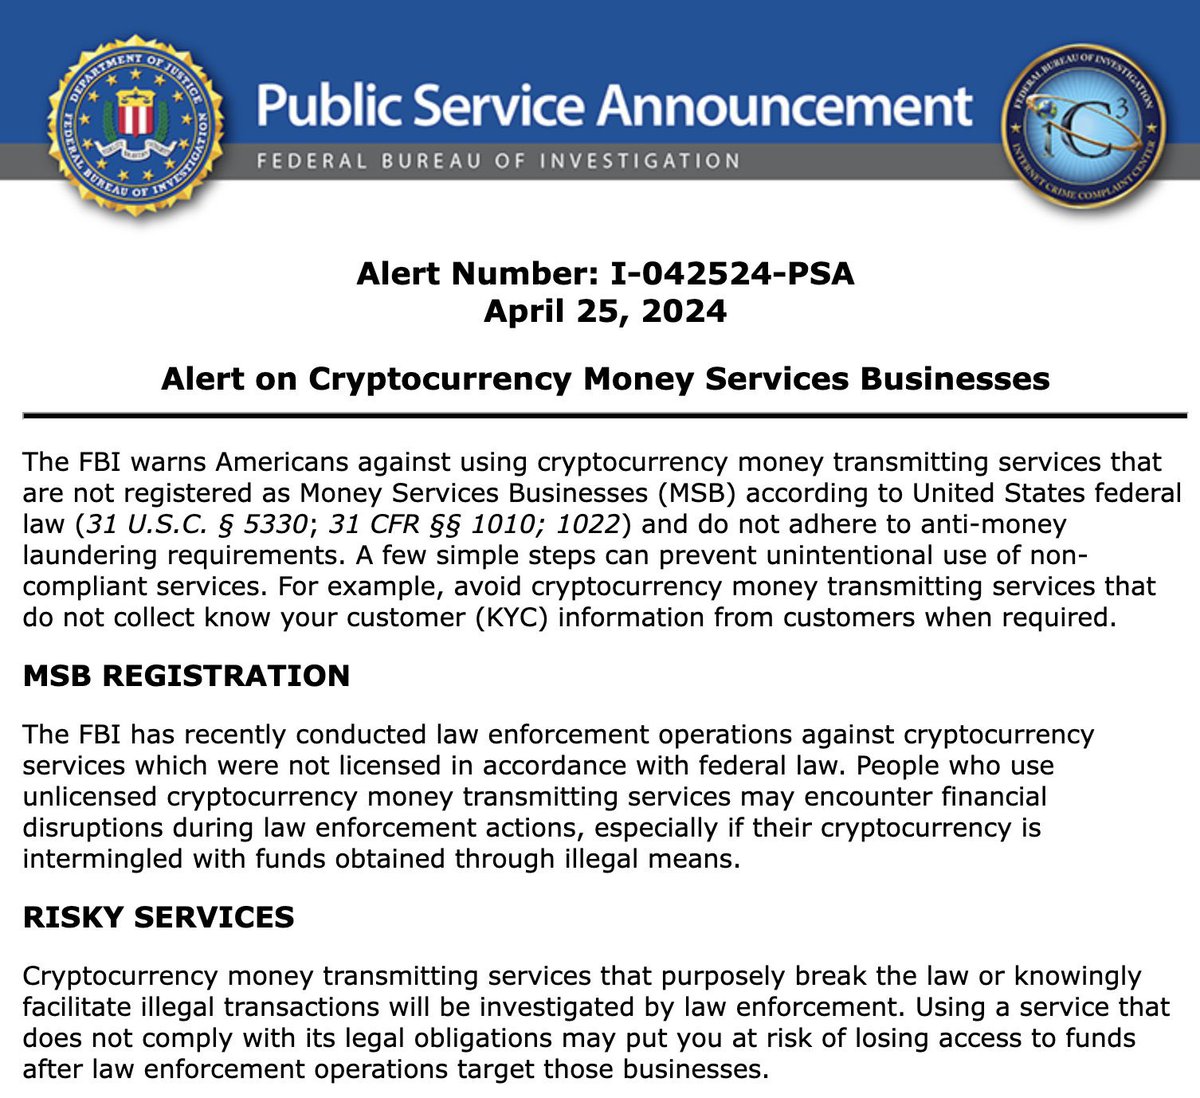 This is a warning worth heeding. The FBI is explicitly telling us that *they themselves* are going to steal your money when they attack non-compliant custodial services. The FBI is making a strong case for self custody!